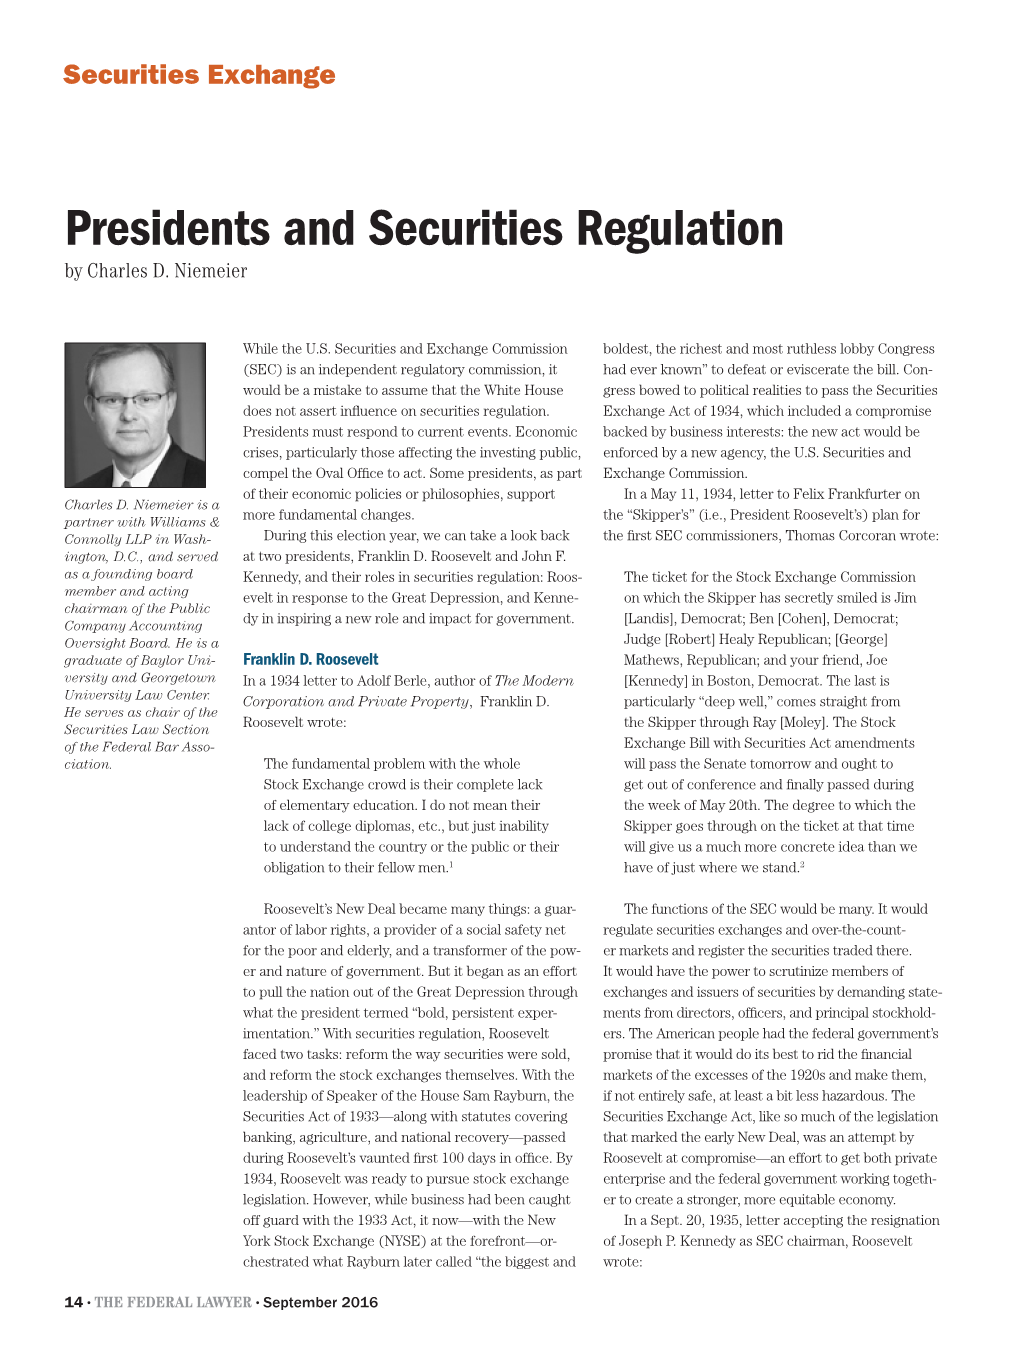 Presidents and Securities Regulation by Charles D